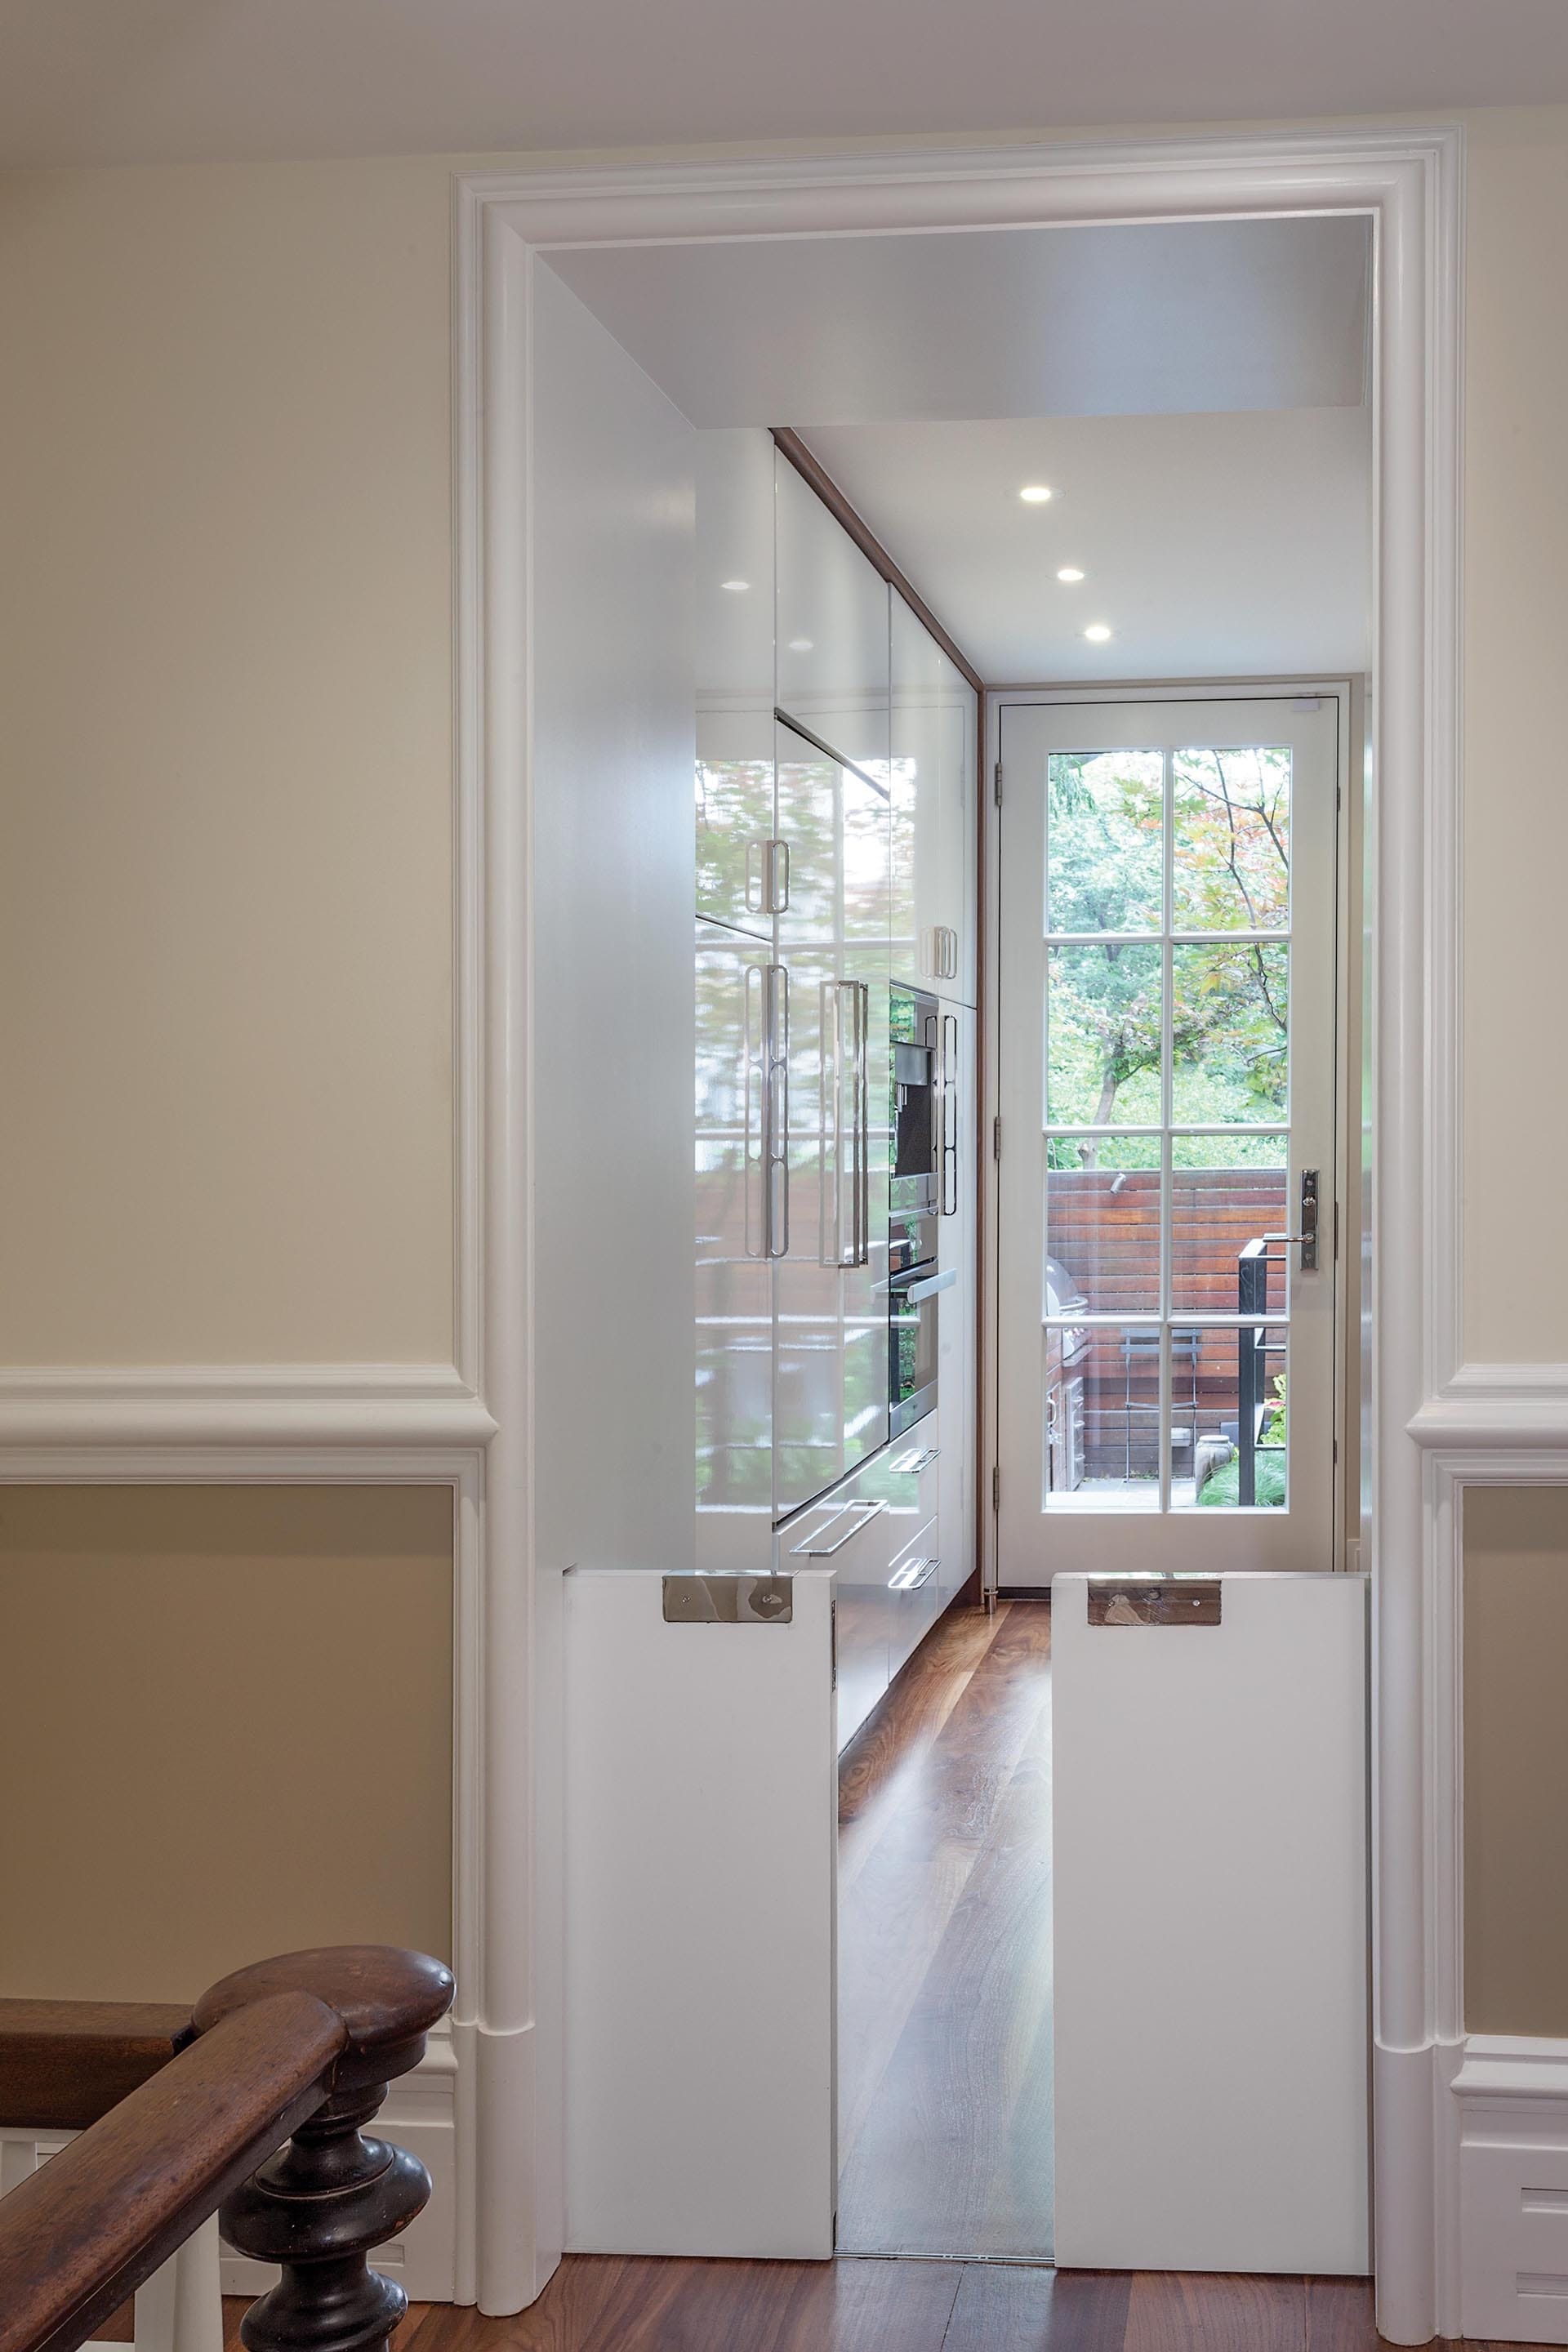 Hallway leading to the kitchen and rear yard with two tiny pocket doors that act as a dog gate